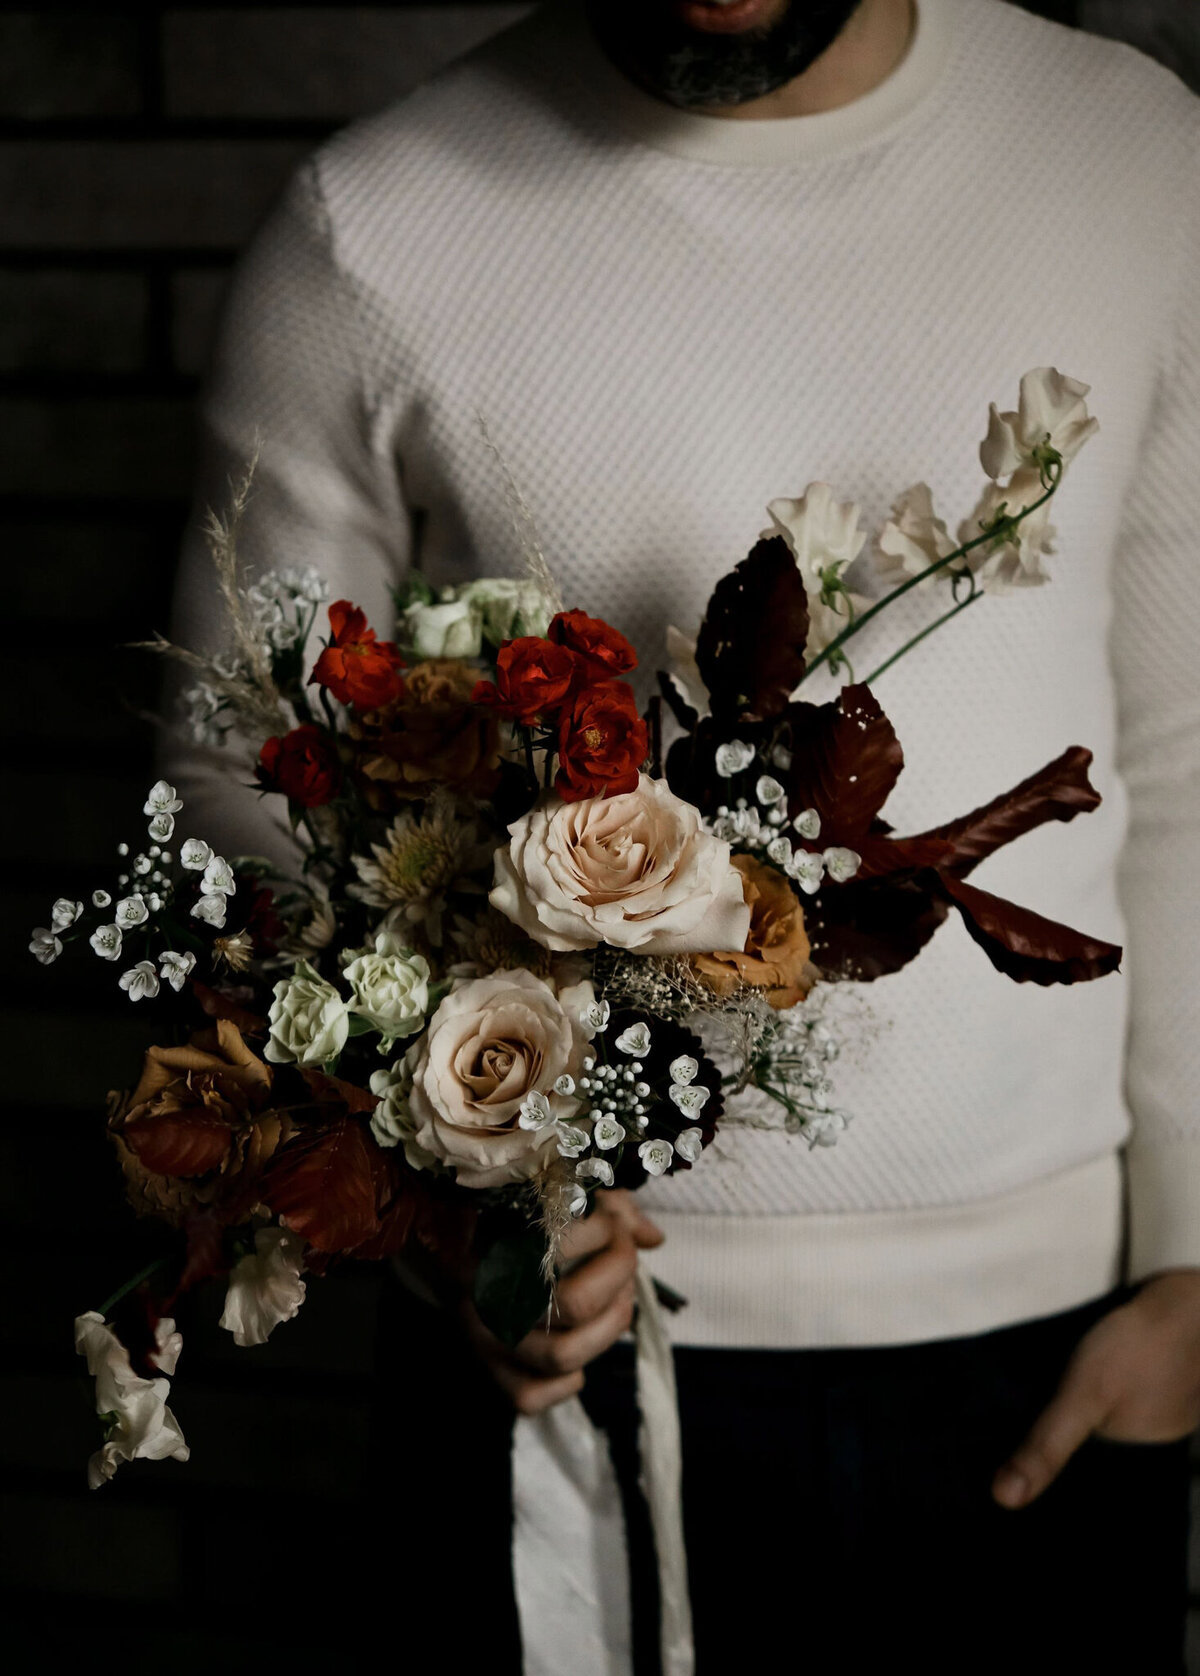 Moody and romantic bouquet by Hue Florals, artistic Calgary, Alberta wedding florist, featured on the Brontë Bride Vendor Guide.